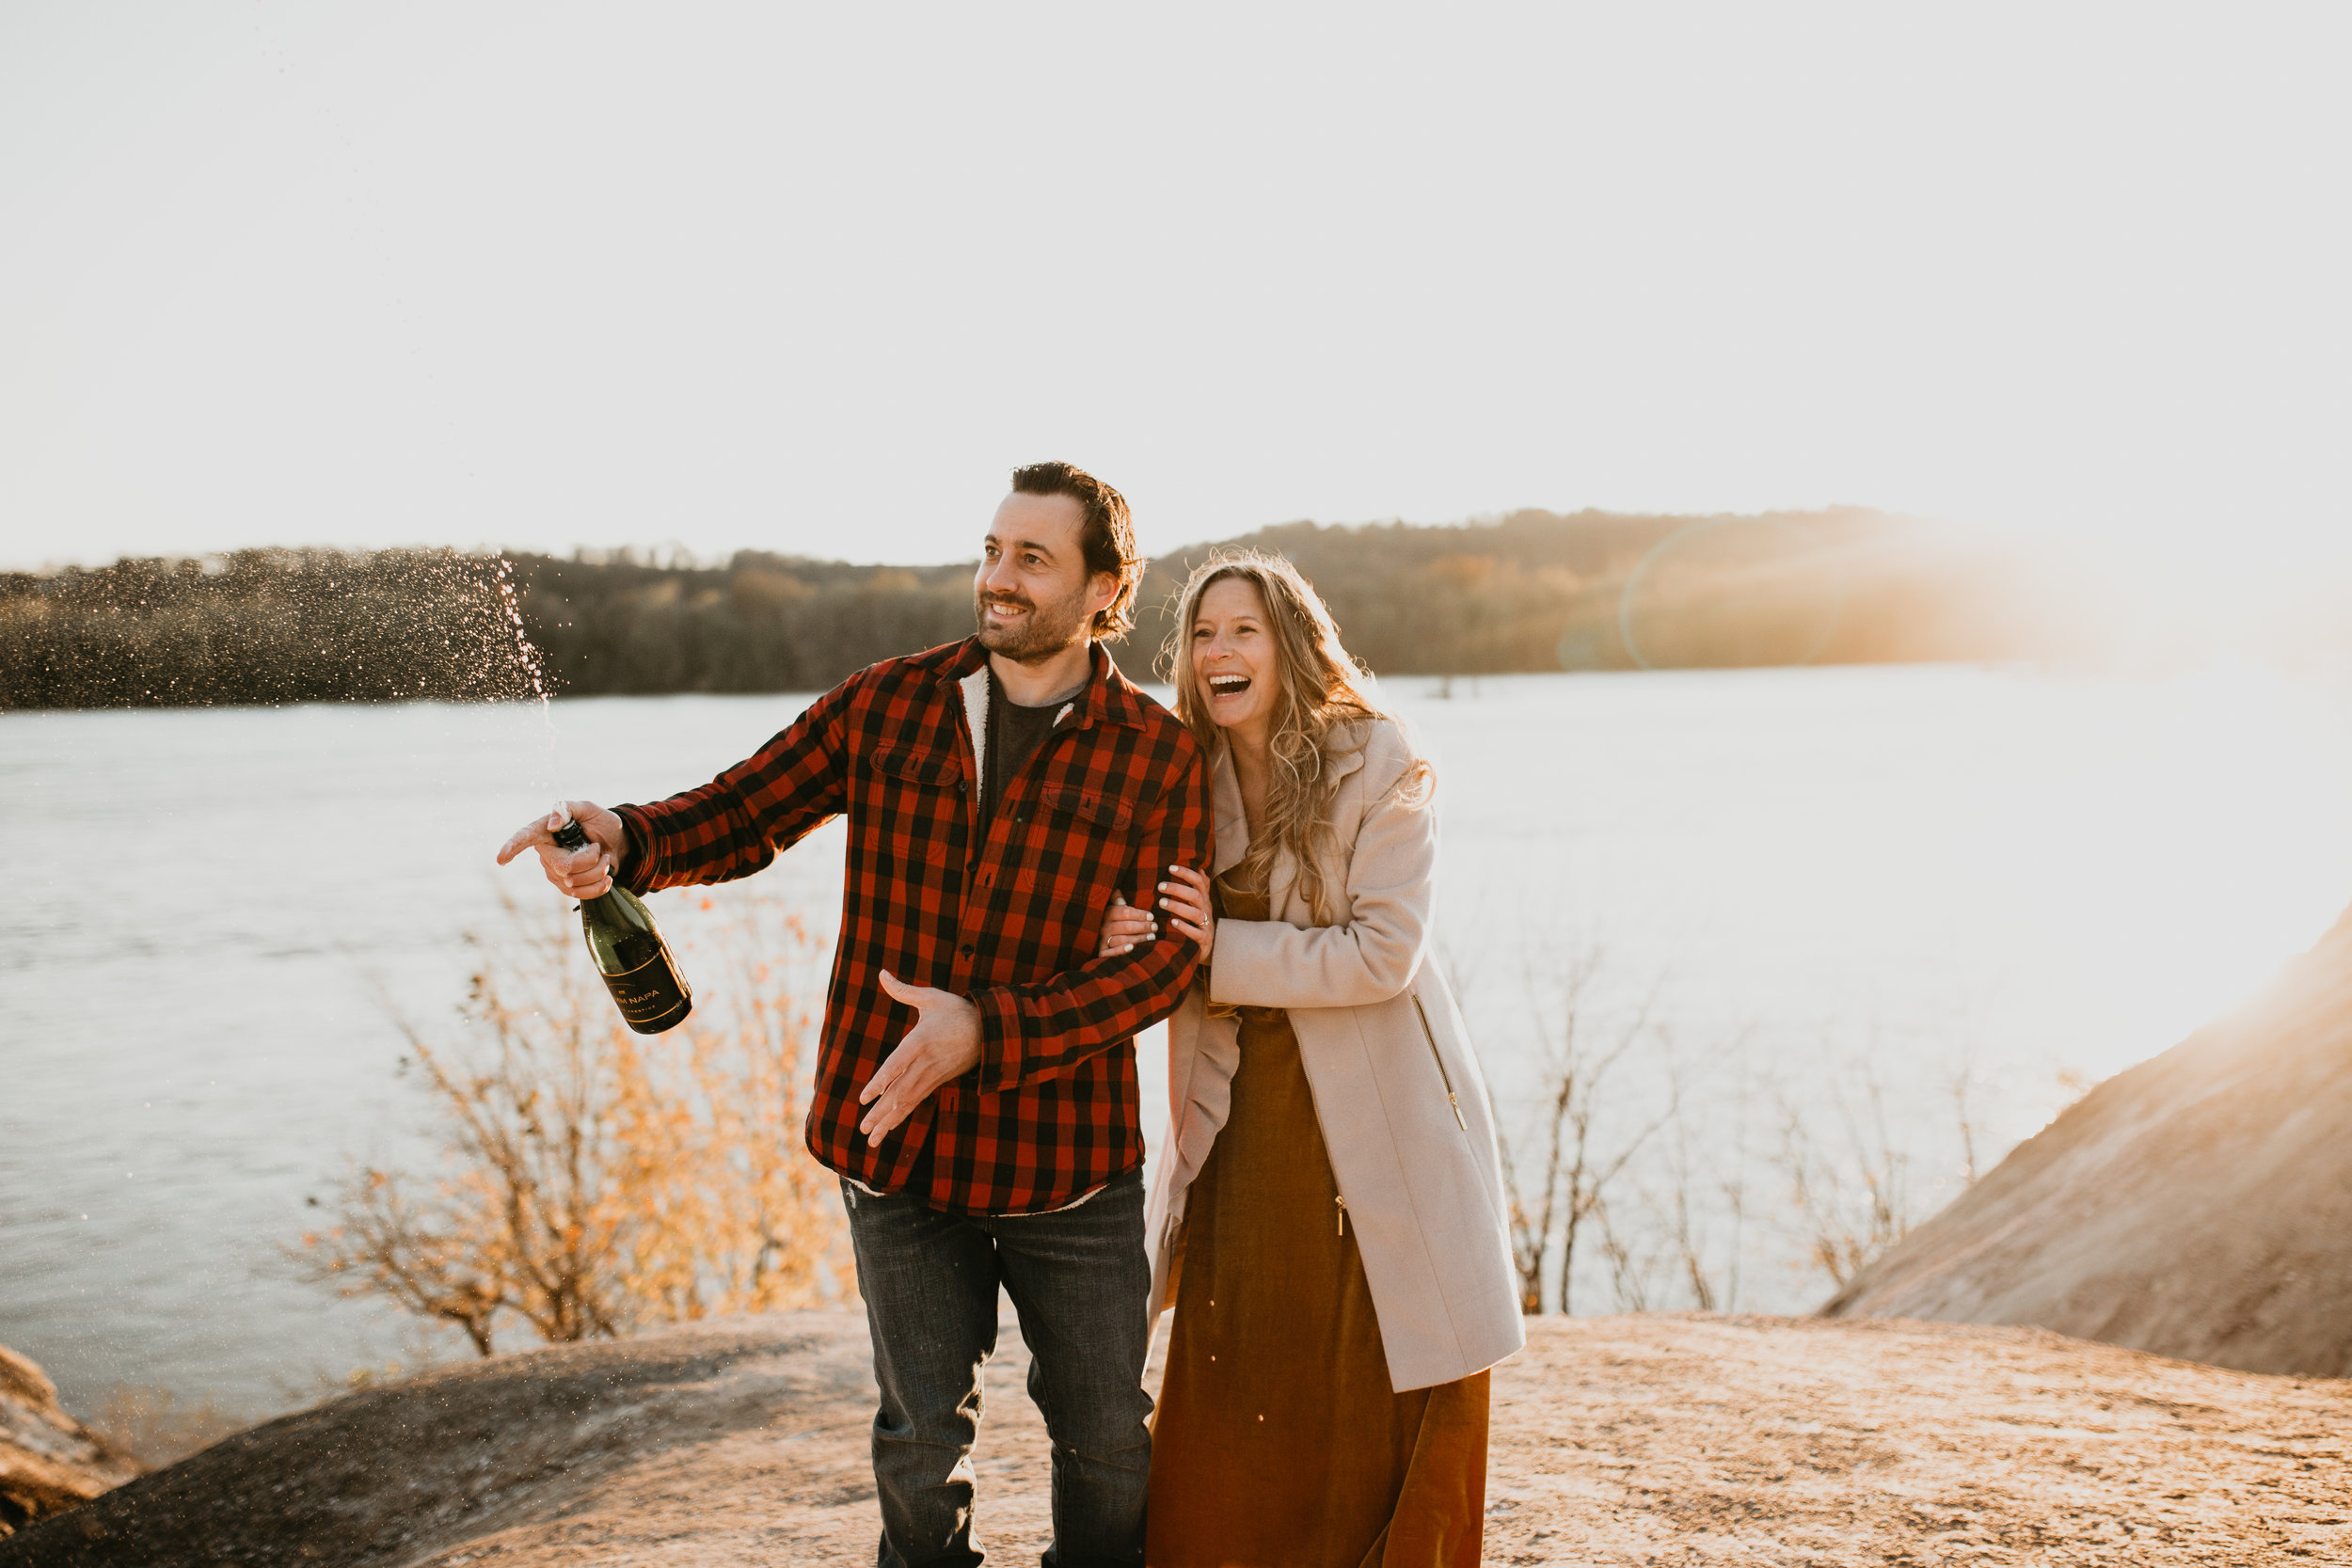 nicole-daacke-photography-white-cliffs-of-conoy-in-lancaster-pa-pennsylvania-adventure-session-adventure-elopement-photographer-engagement session-in-lancaster-pa-photographer-golden-sunset-winter-solstice-wedding-riverside-elopement-4114.jpg